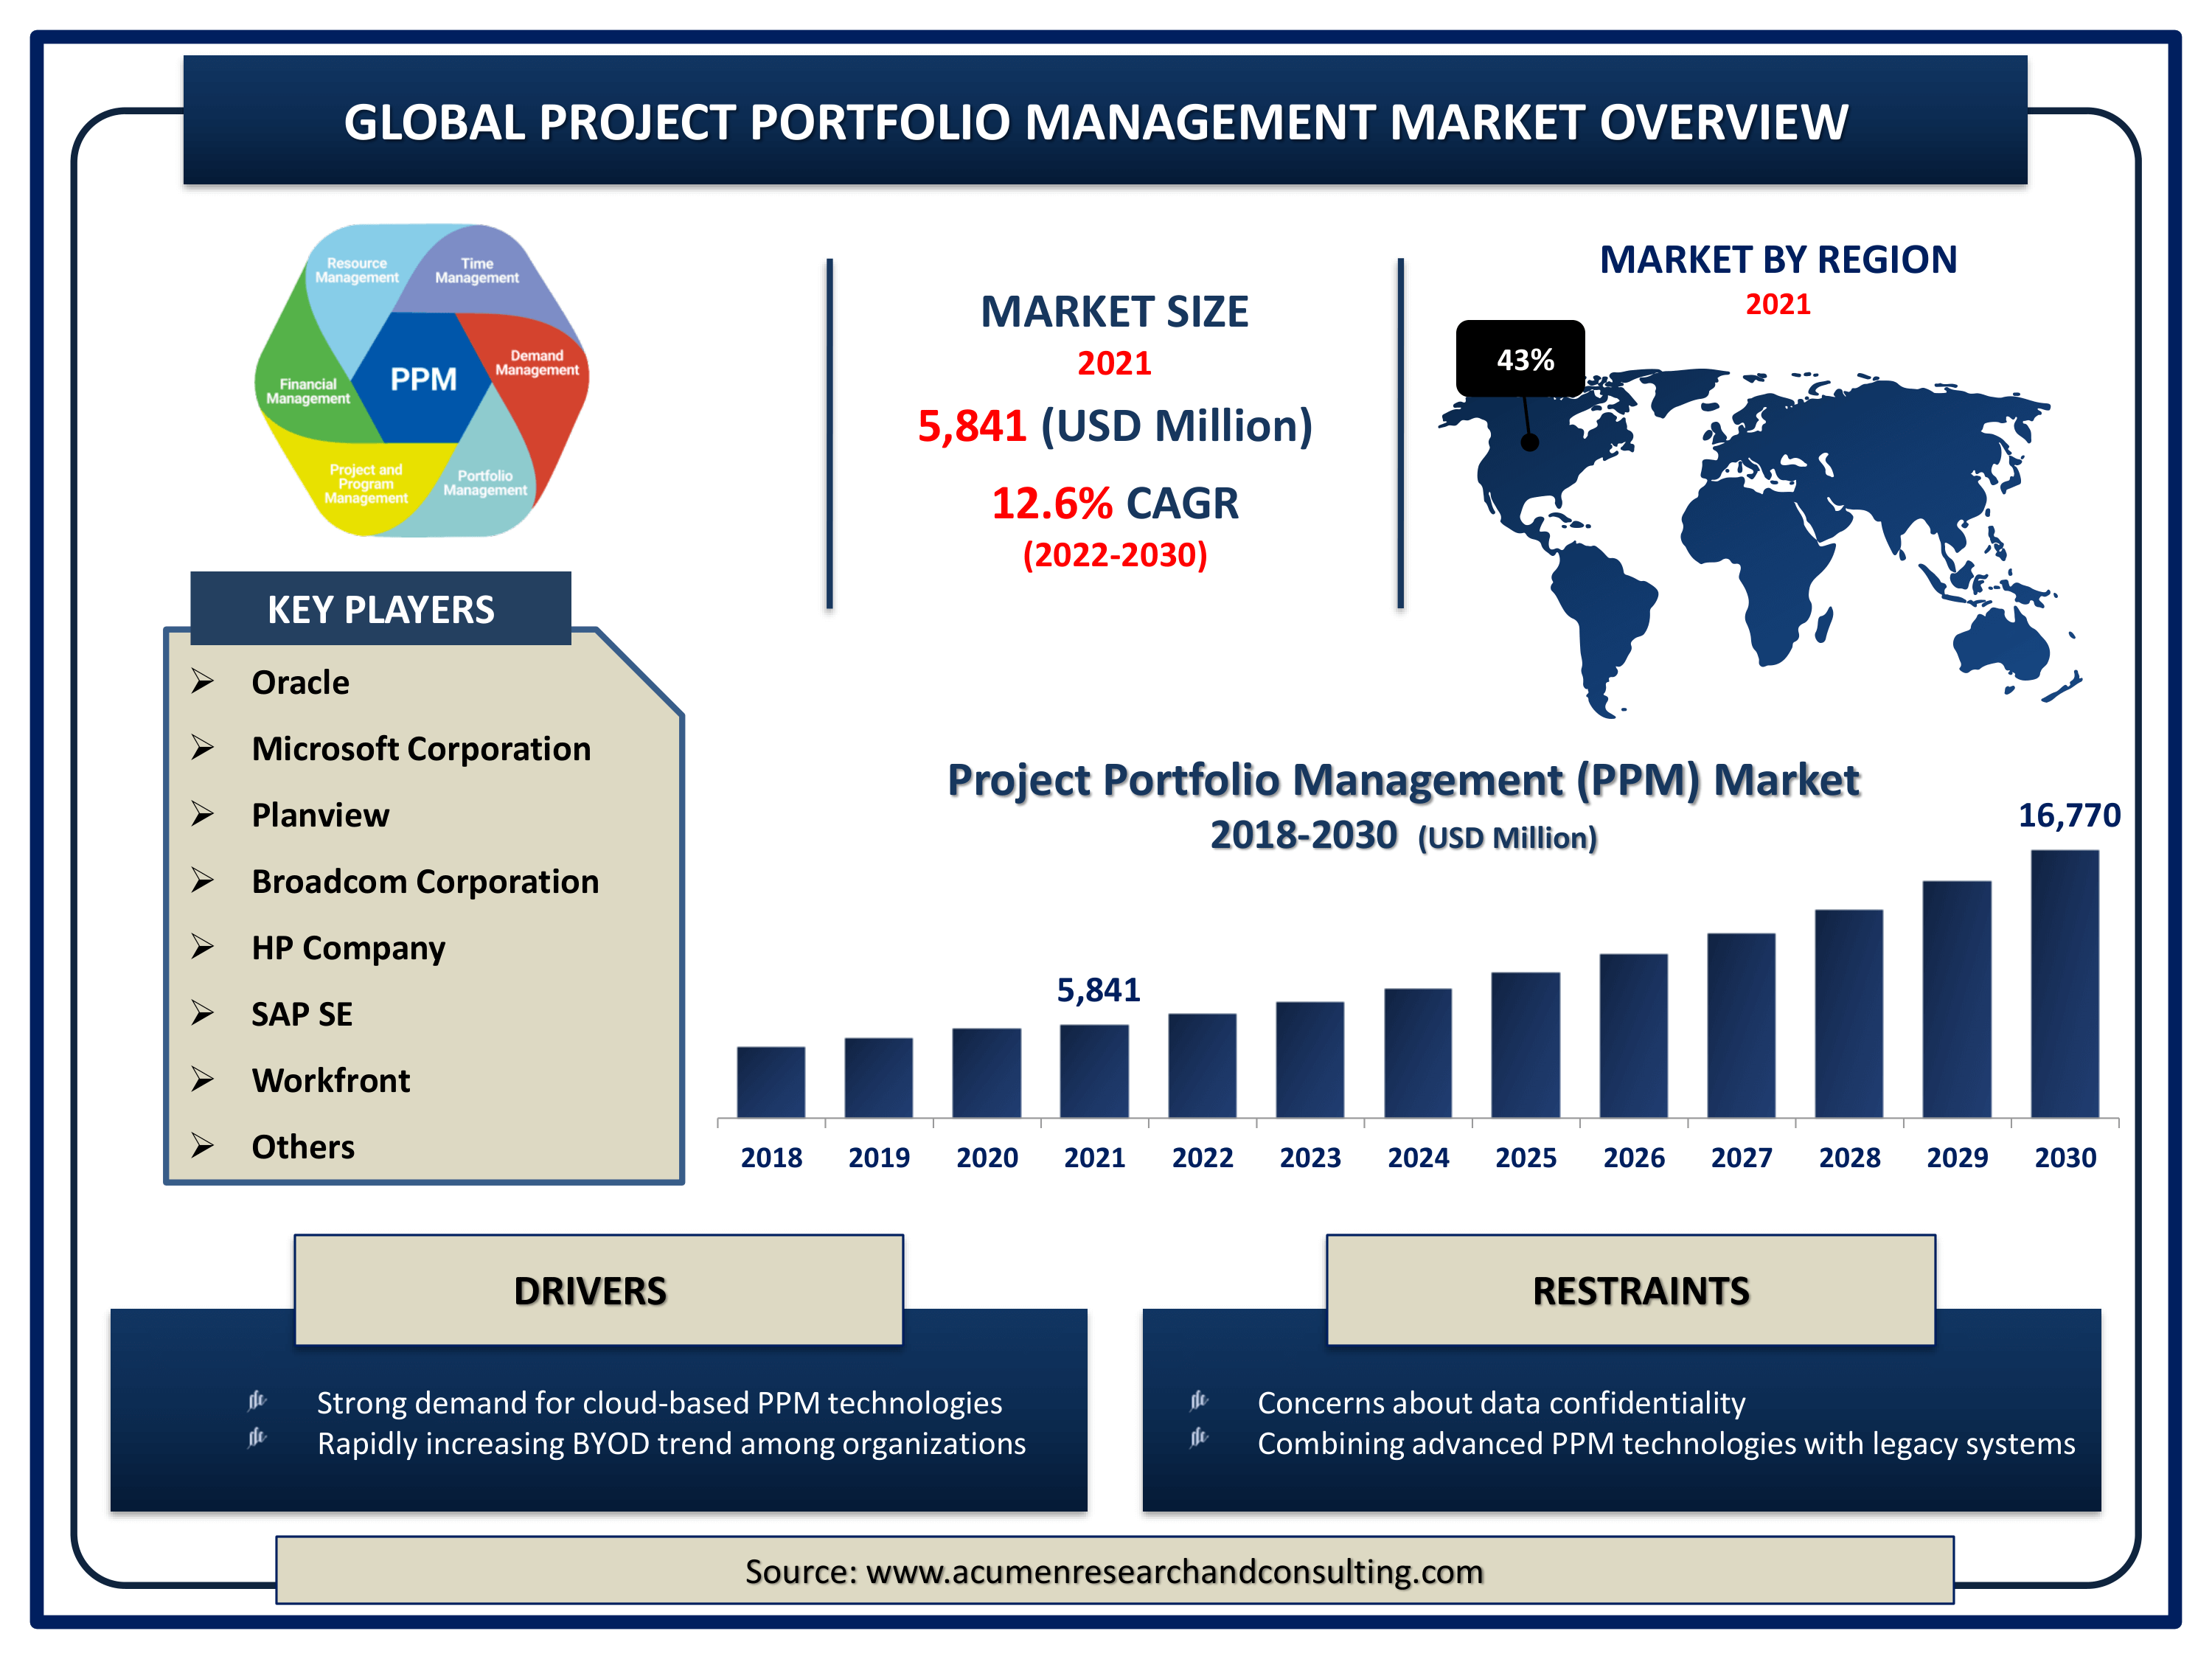 Global project portfolio management market revenue intended to gain USD 16,770 million by 2030 with a CAGR of 12.6% from 2022 to 2030